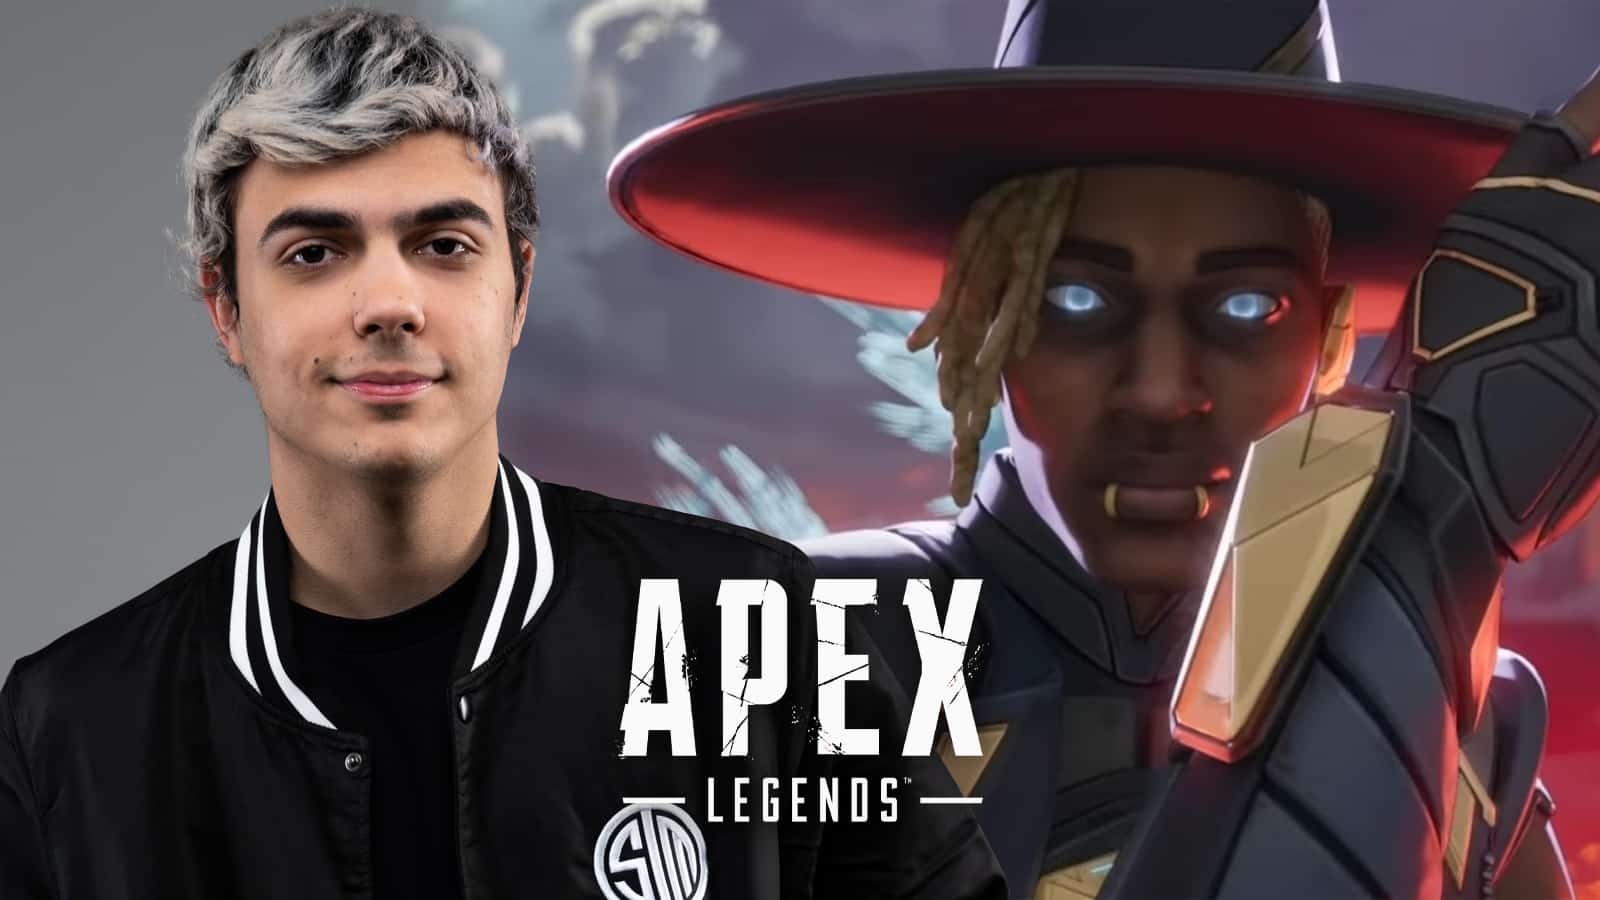 ImperialHal Seer Apex legends impossible to balance season 10